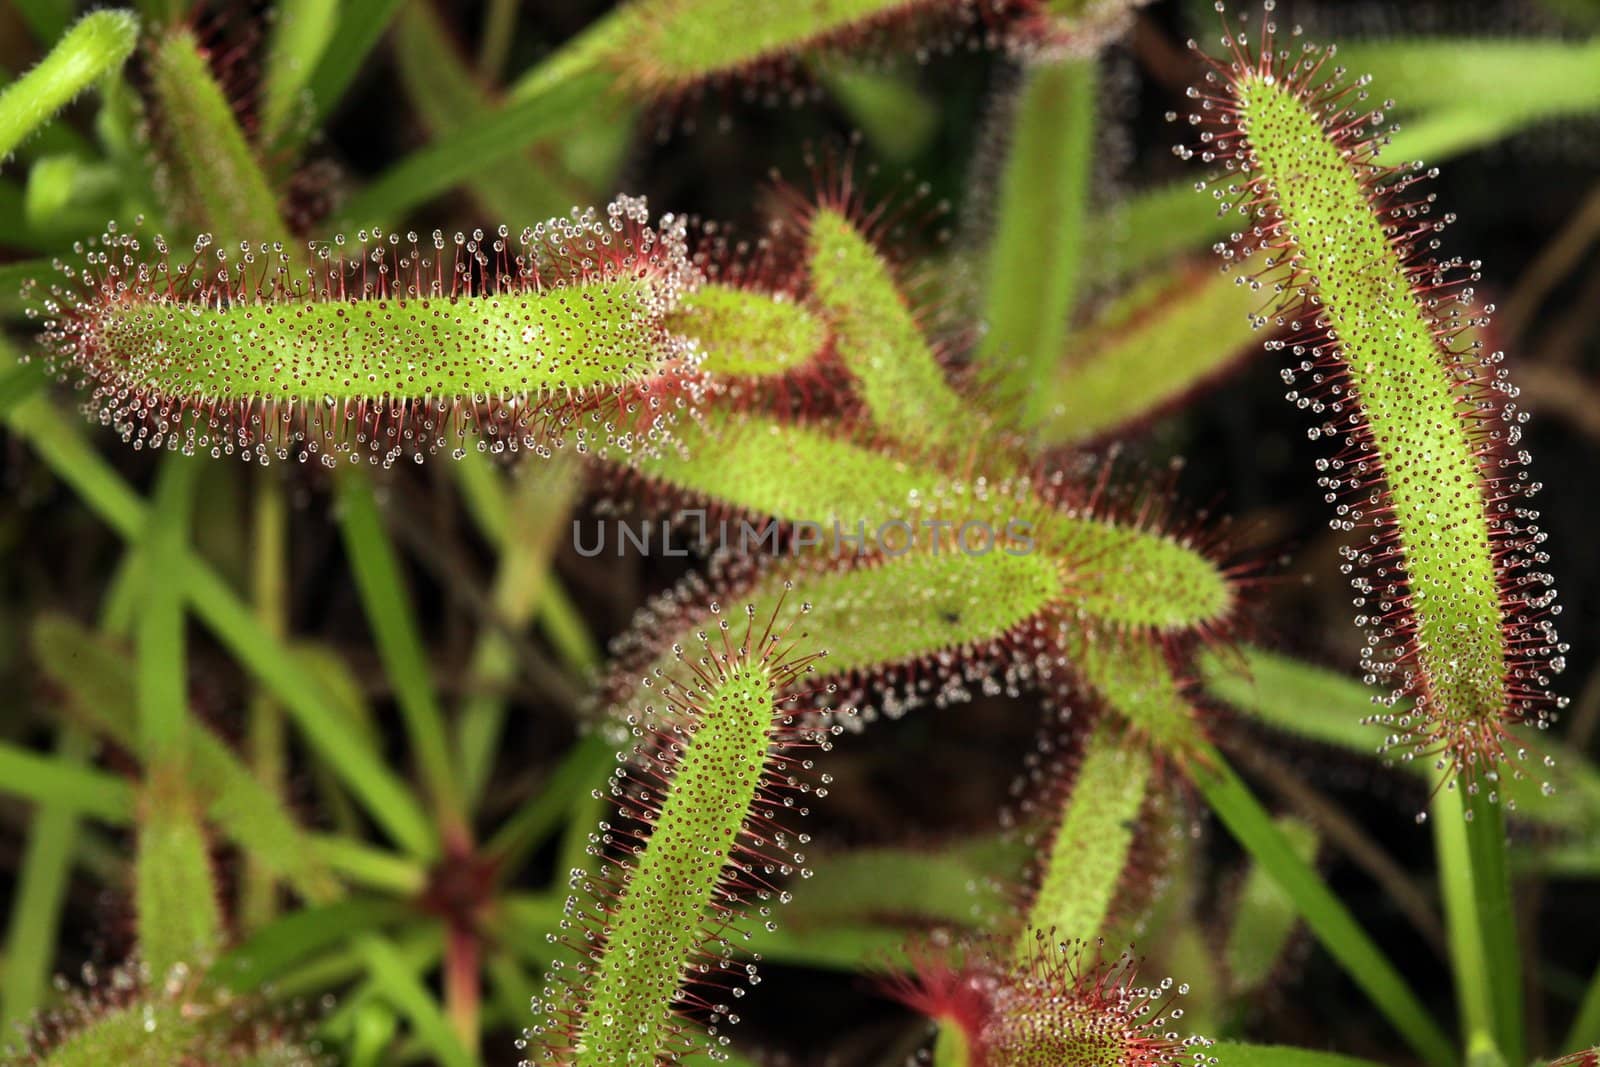 Venus Flytrap in Nature With Sticky Sap on Tips to Catch Insects